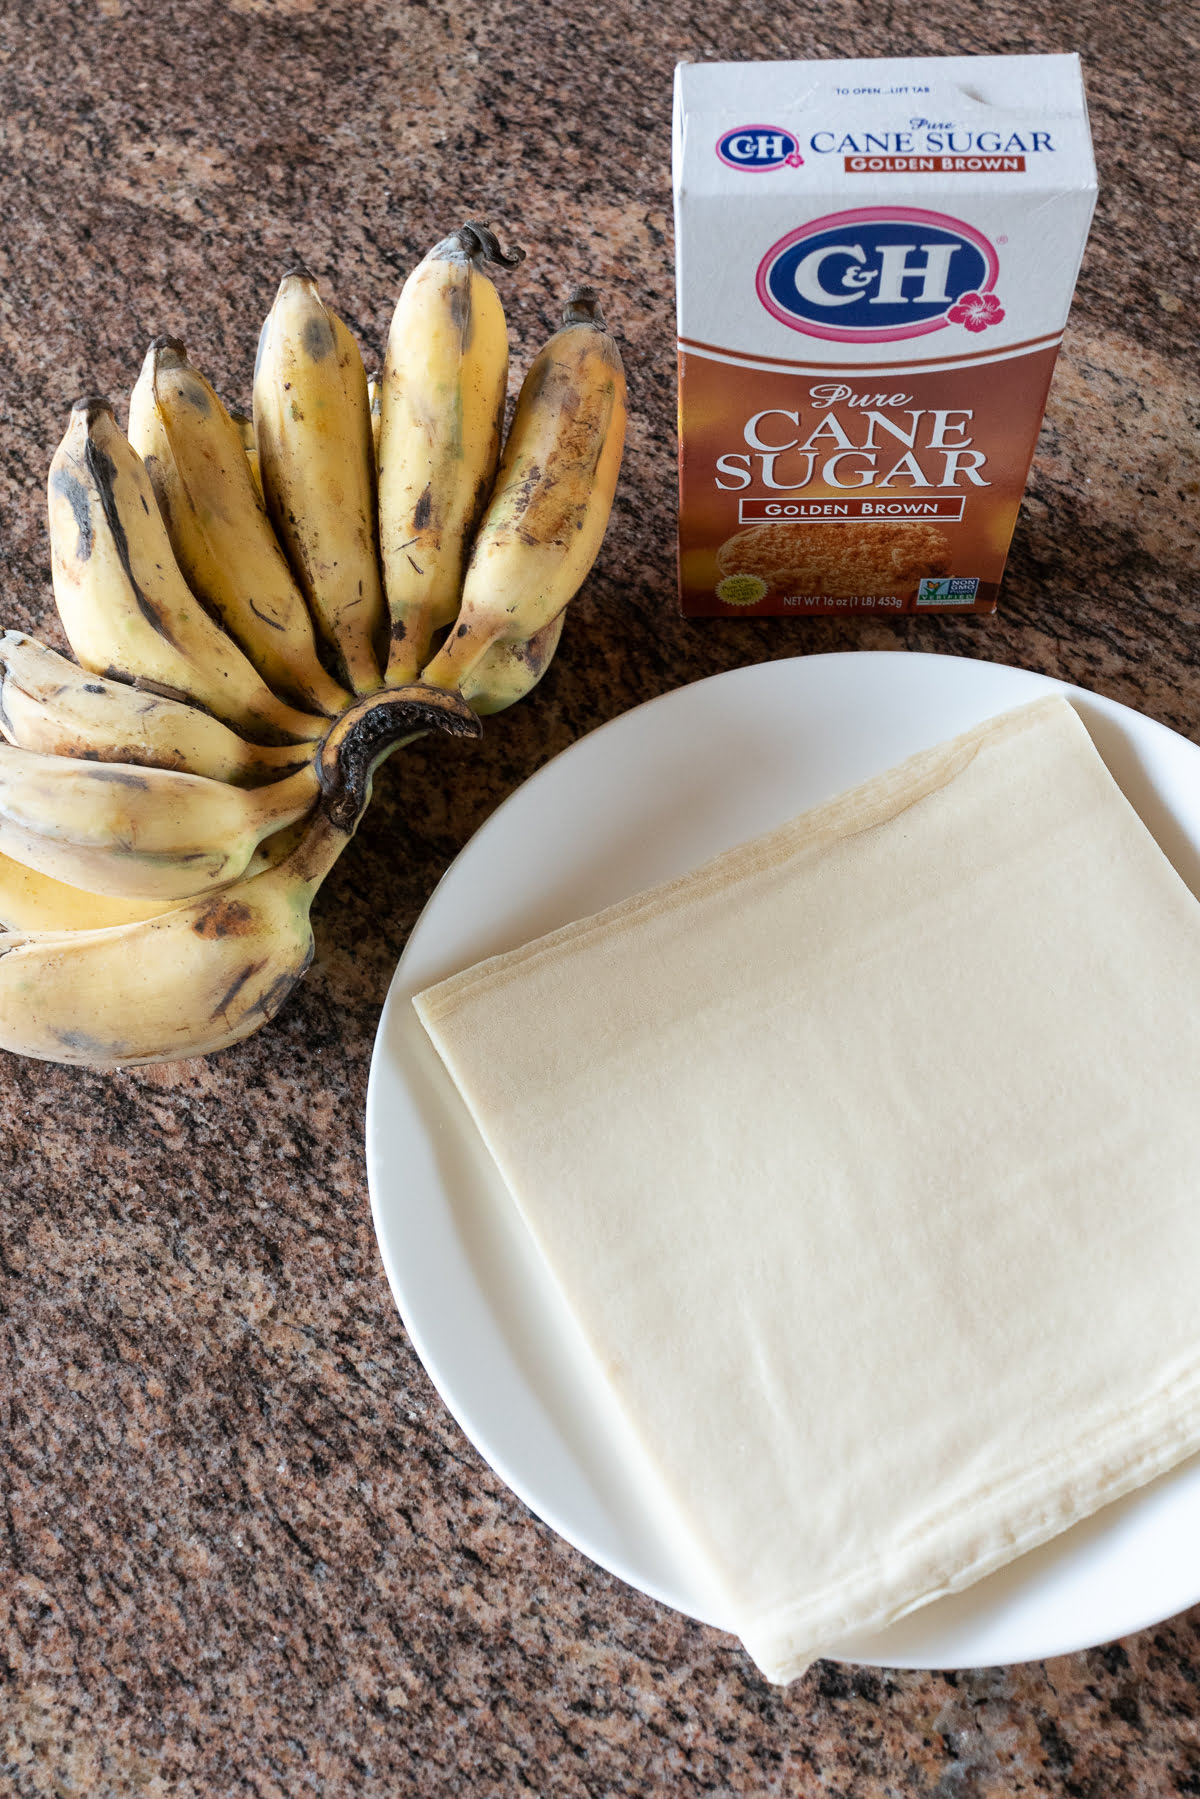 Ingredients for banana lumpia on a counter (apple bananas, brown sugar, and lumpia wrappers).